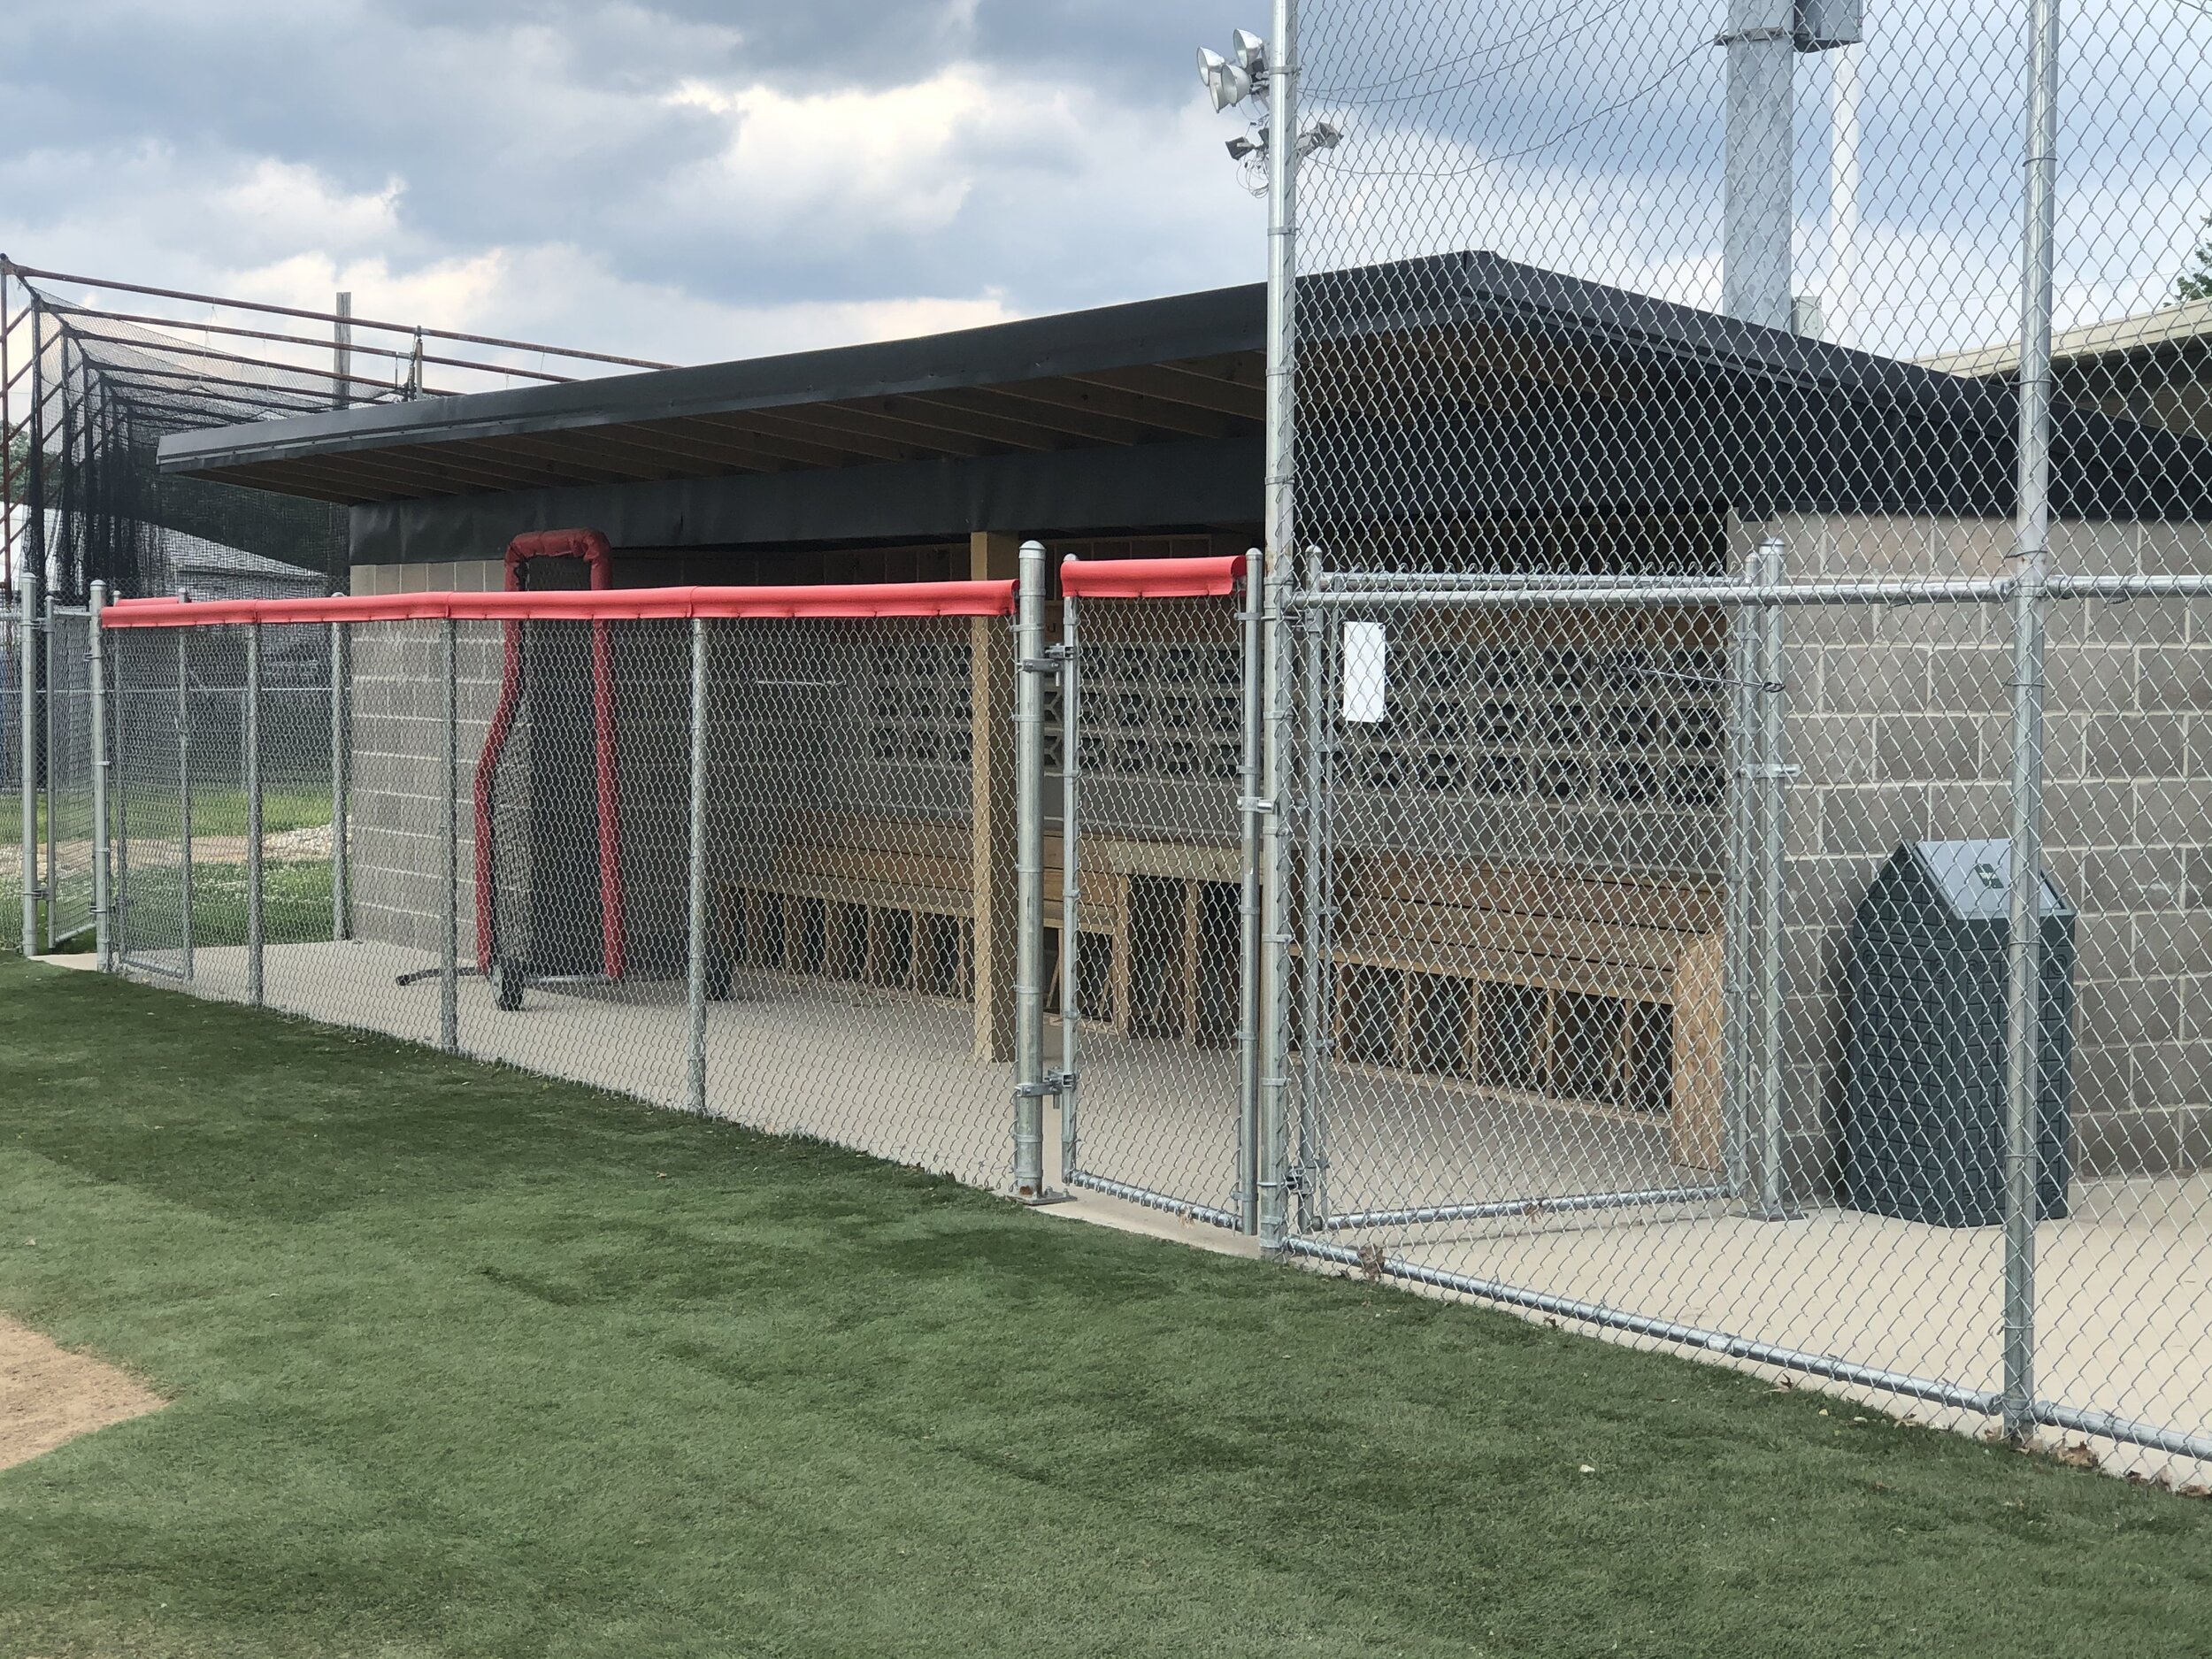 Full field dugout space